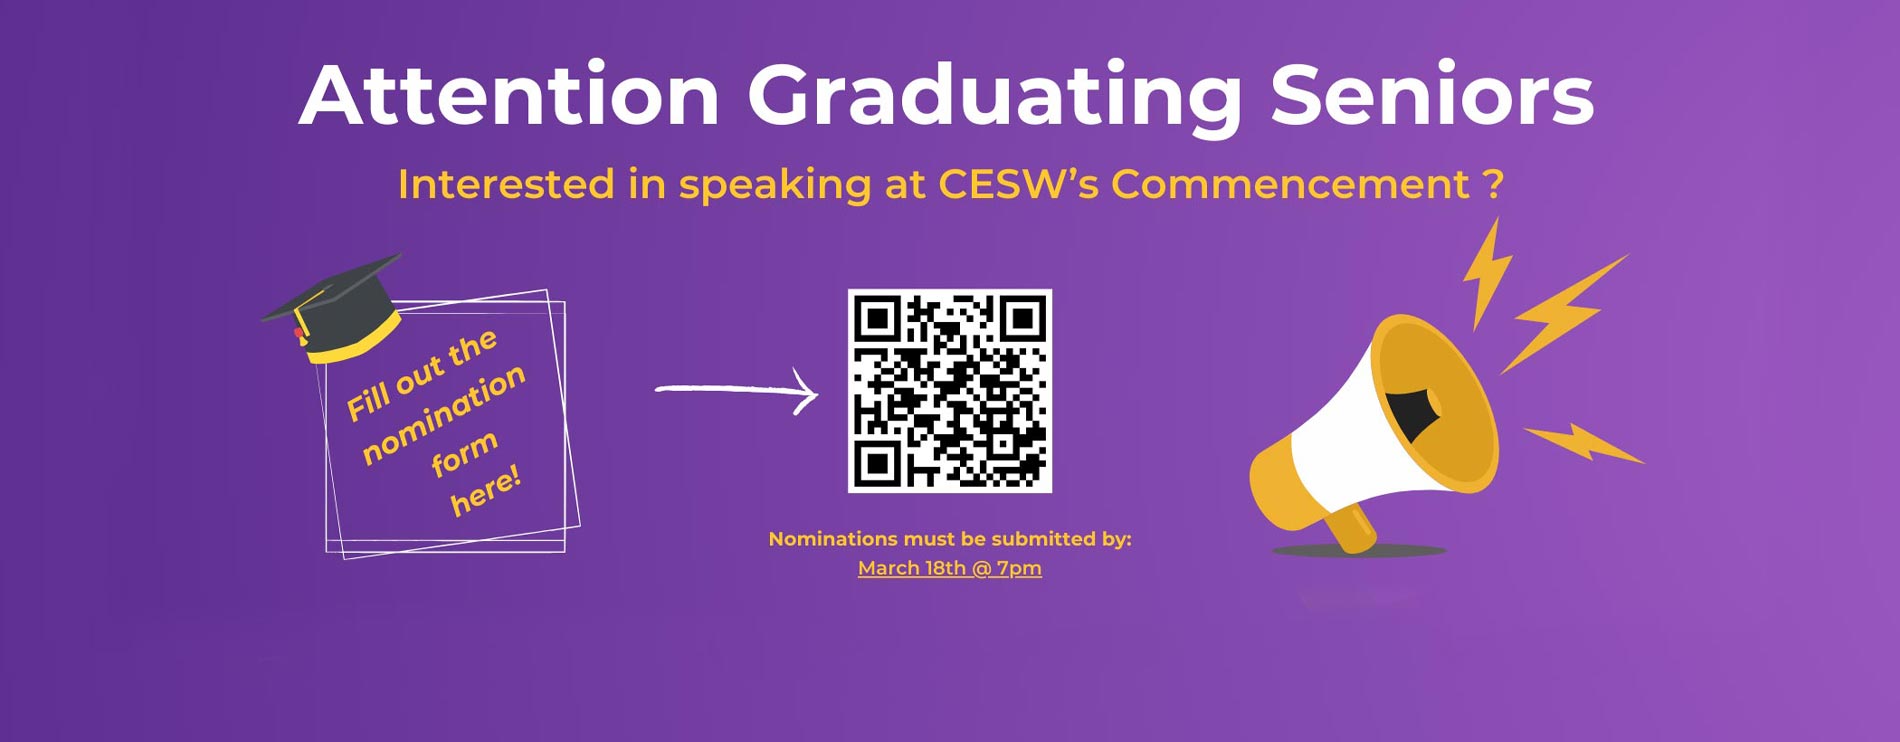 Attention Graduating Seniors       Interested in speaking at CESW's Commencement?